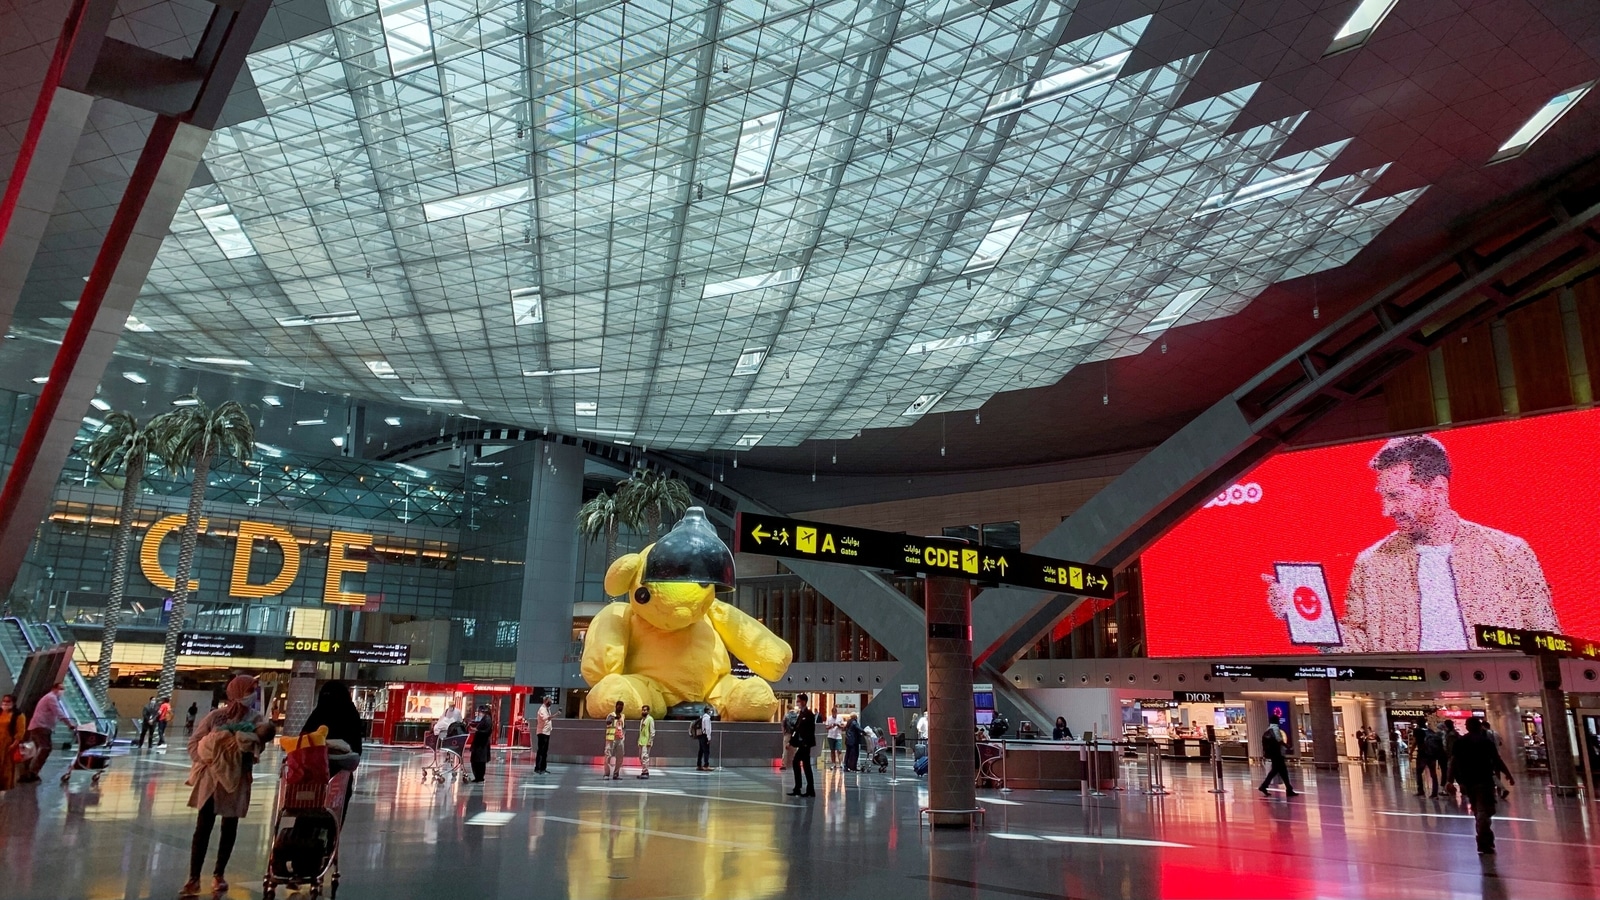 Doha international airport named “Best Airport in the World